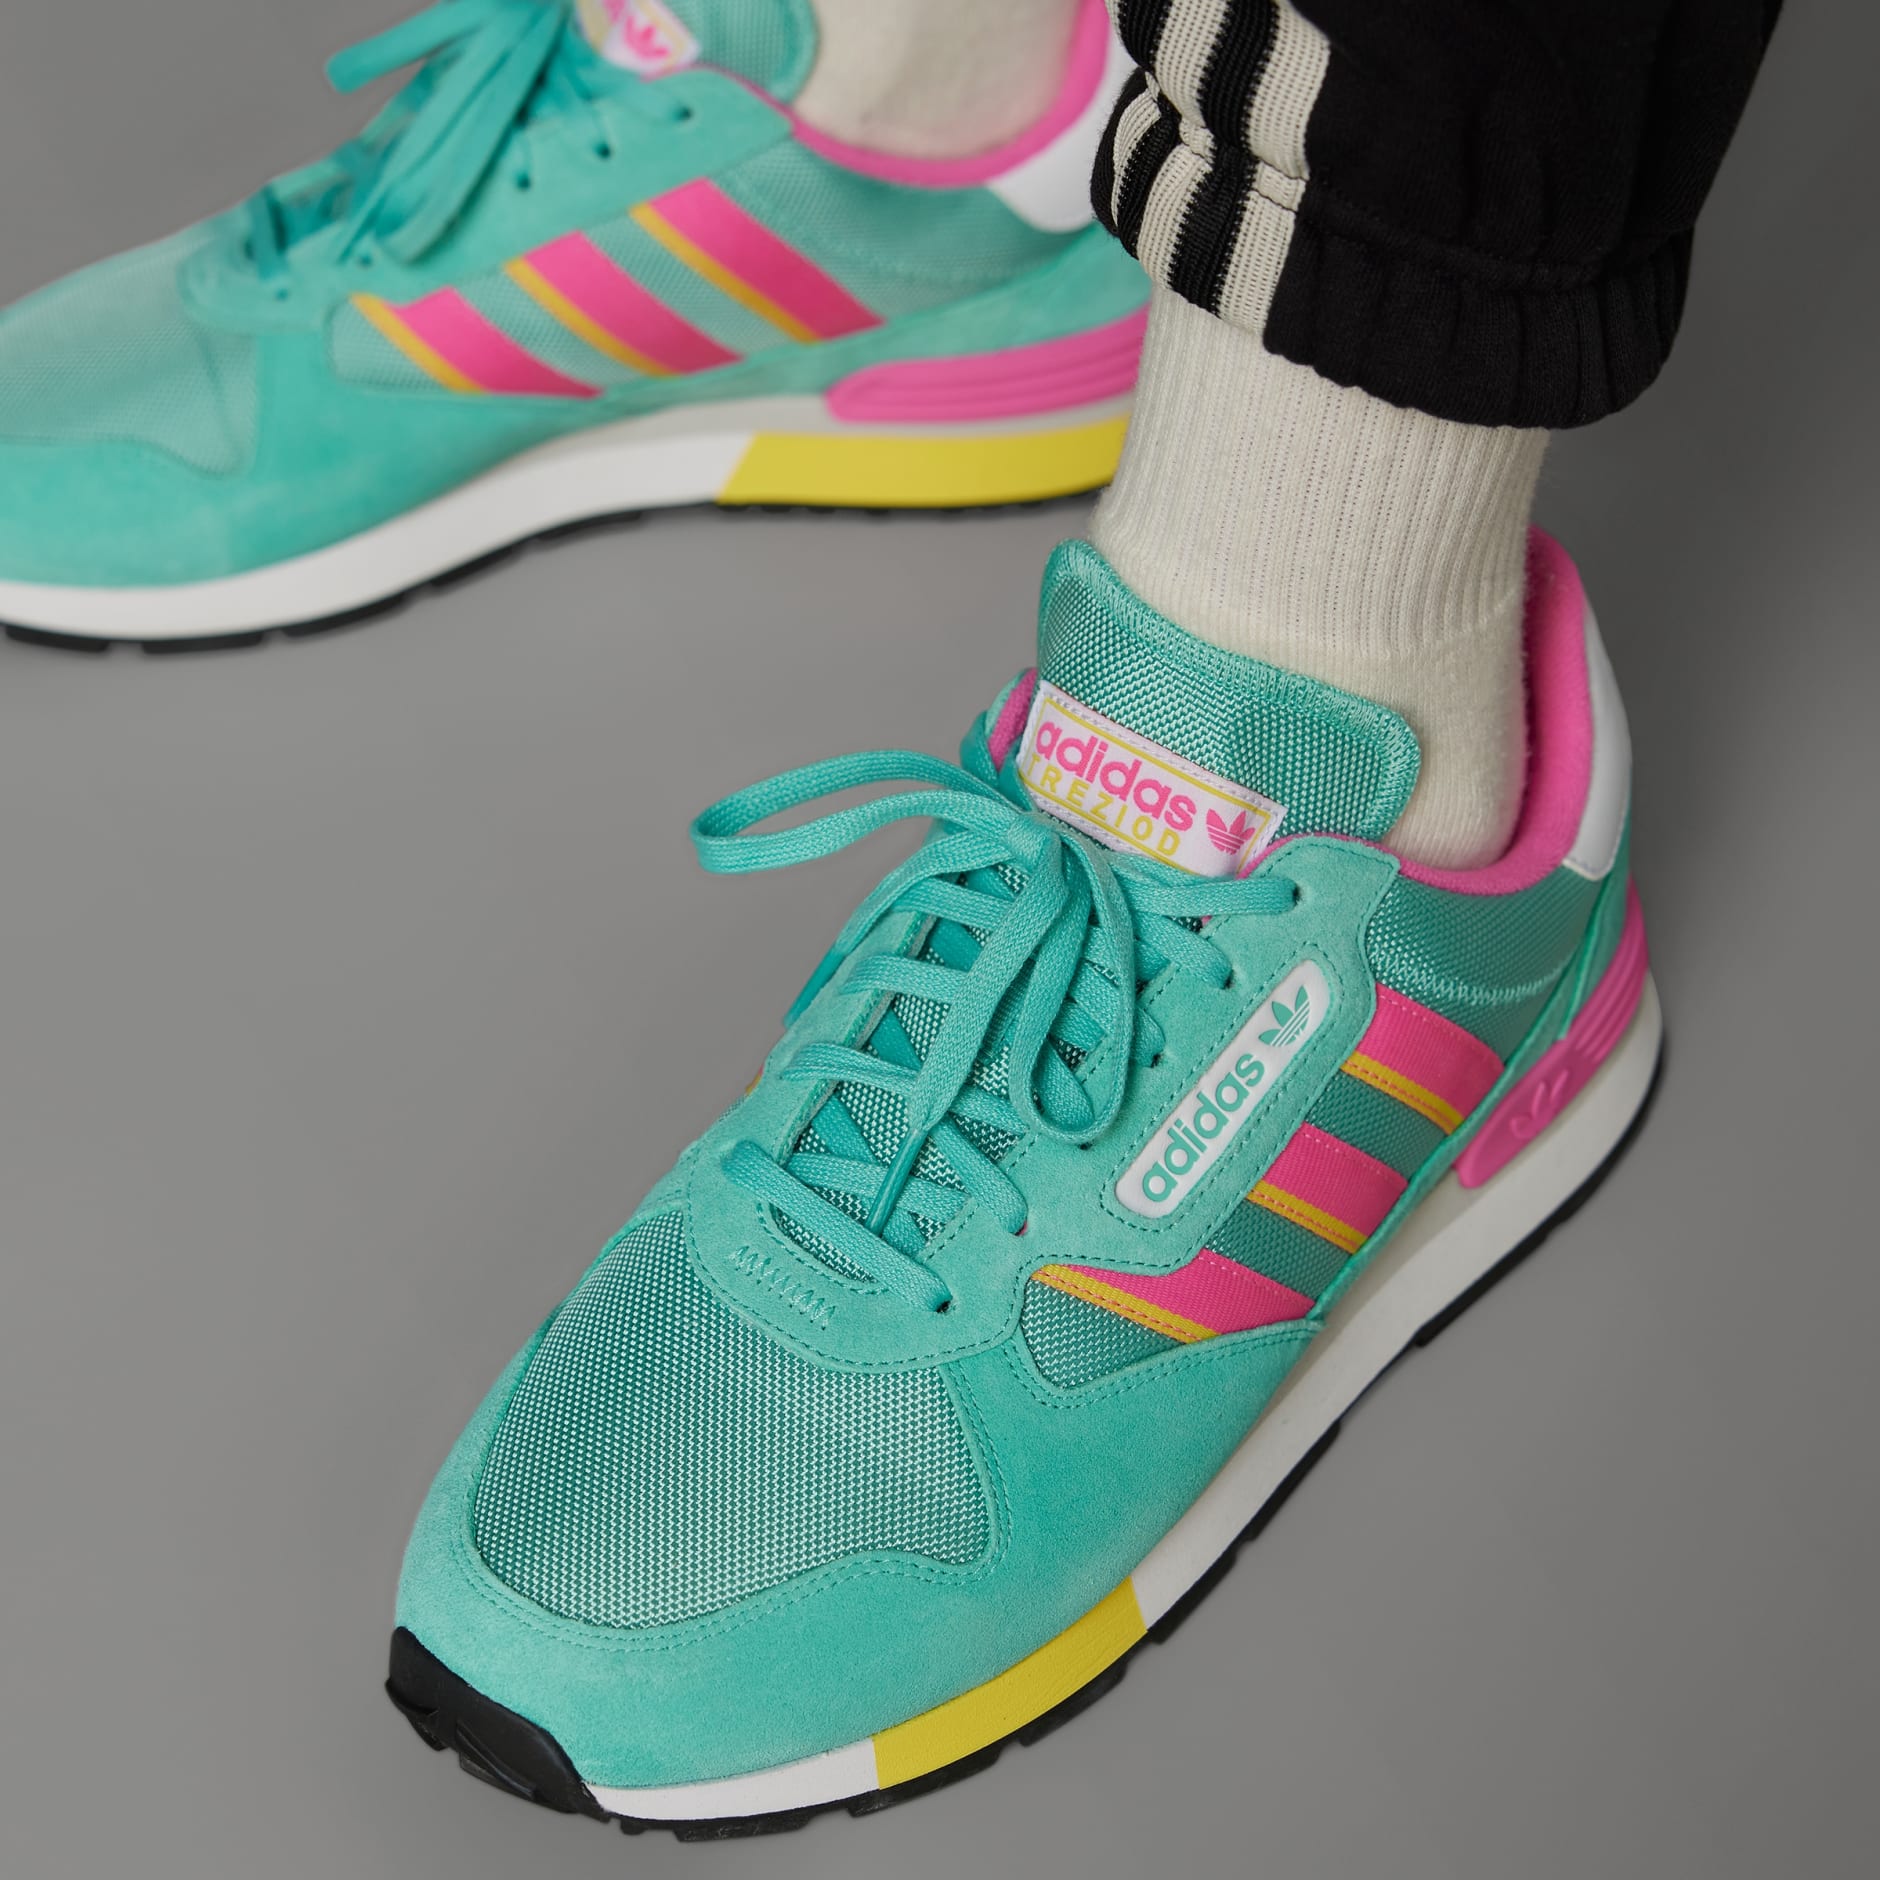 Shoes - Treziod 2 Shoes - Turquoise | adidas South Africa